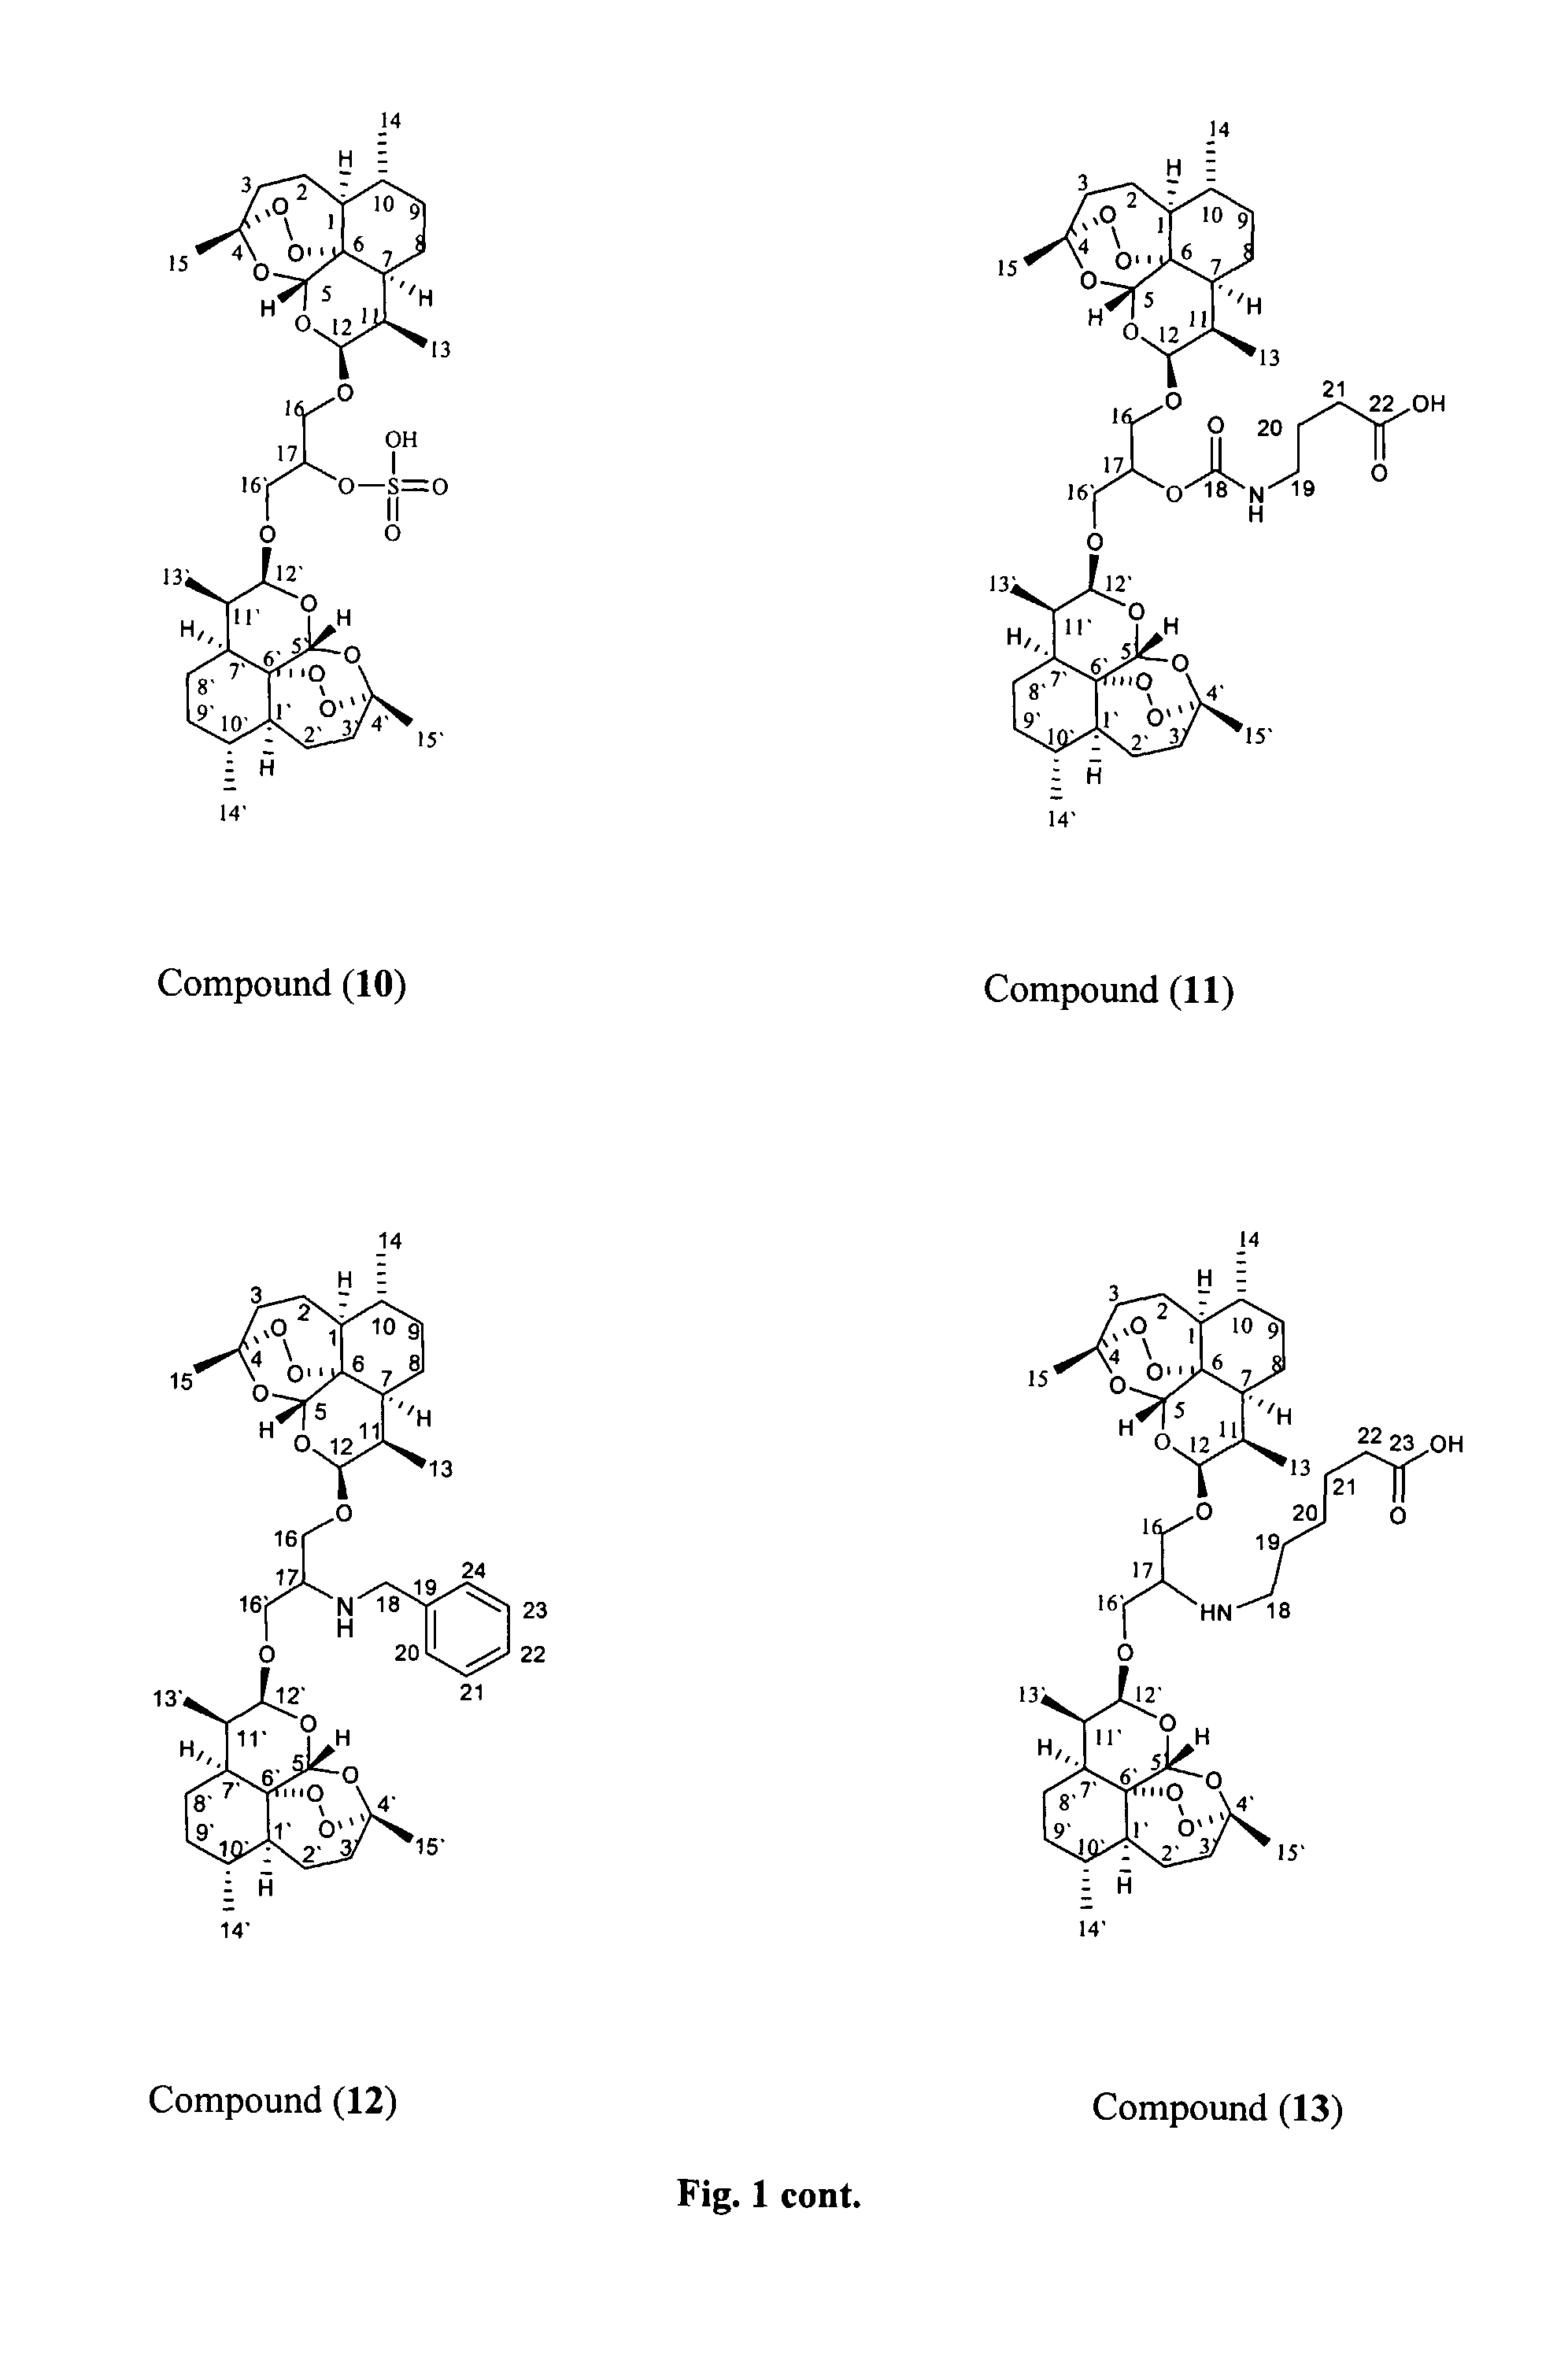 Anticancer and antiprotozoal dihydroartemisinene and dihydroartemisitene dimers with desirable chemical functionalities